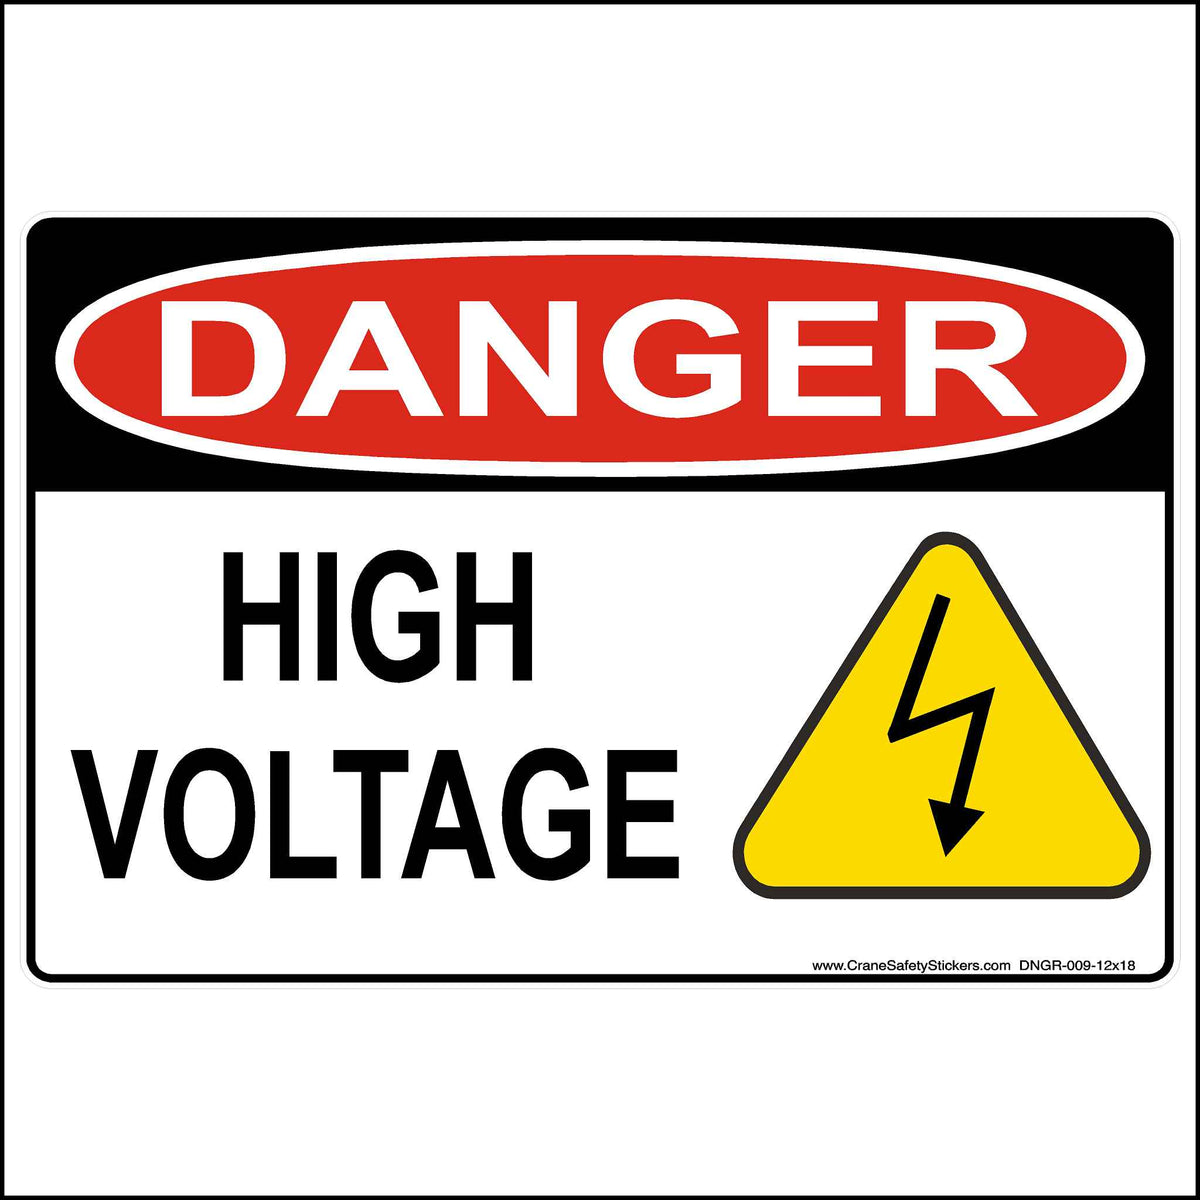 12x18 inch Danger sign printed with the osha danger symbol and the words high voltage and the caution high voltage symbol in yellow.